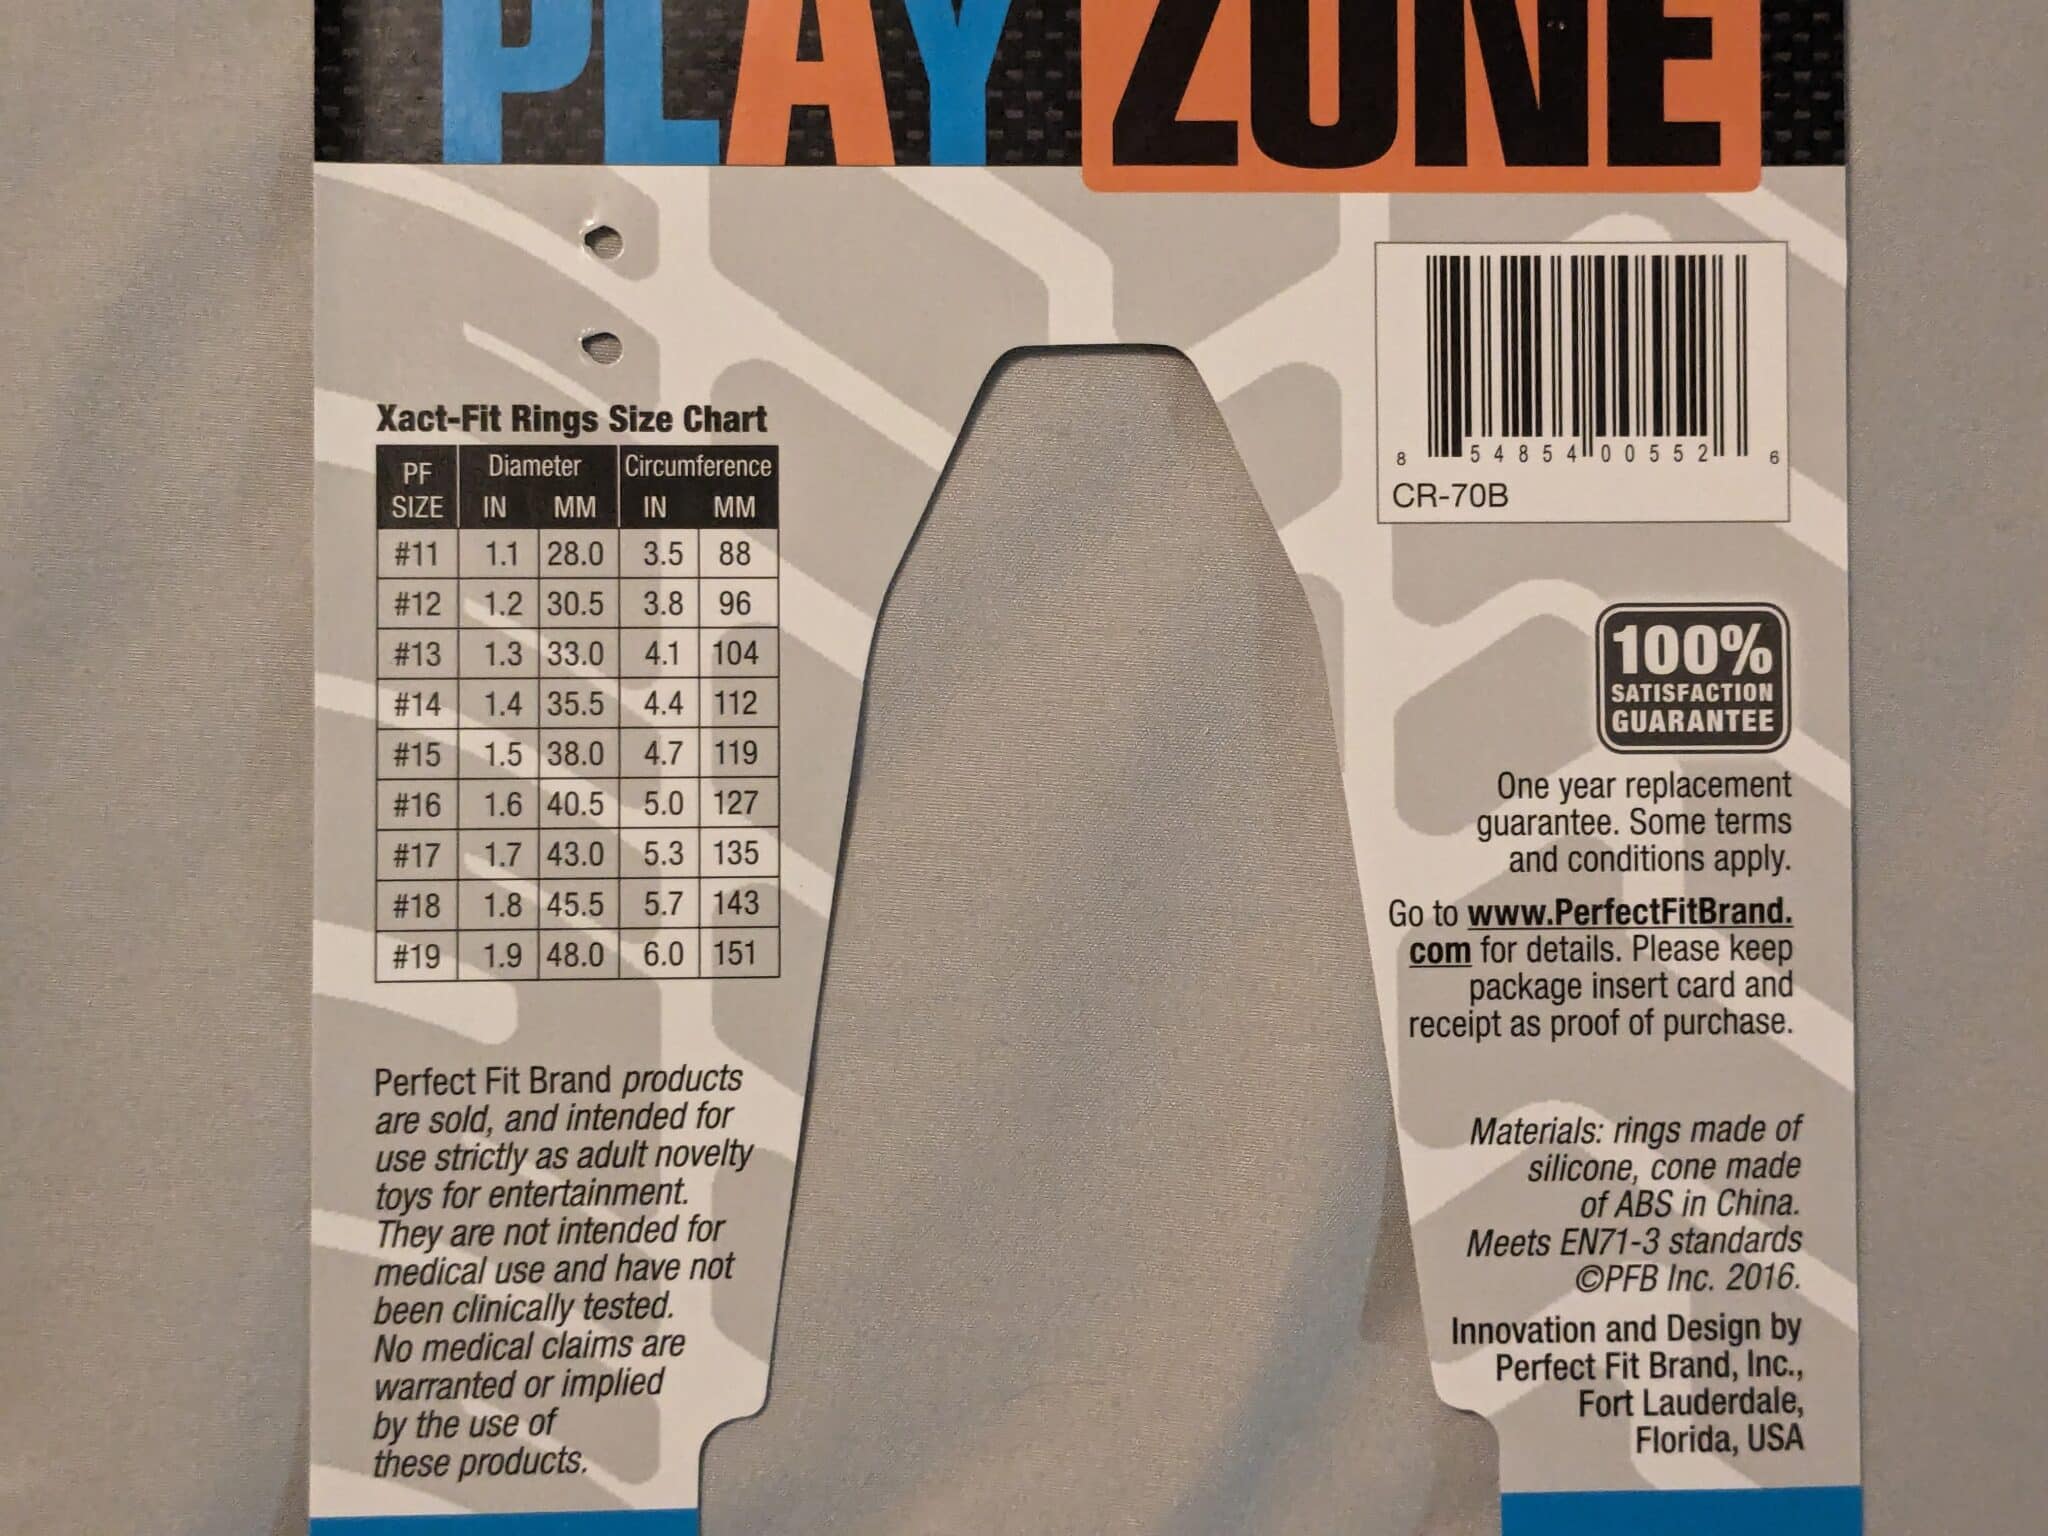 Perfect Fit Play Zone Cock Ring Set Grading the Quality